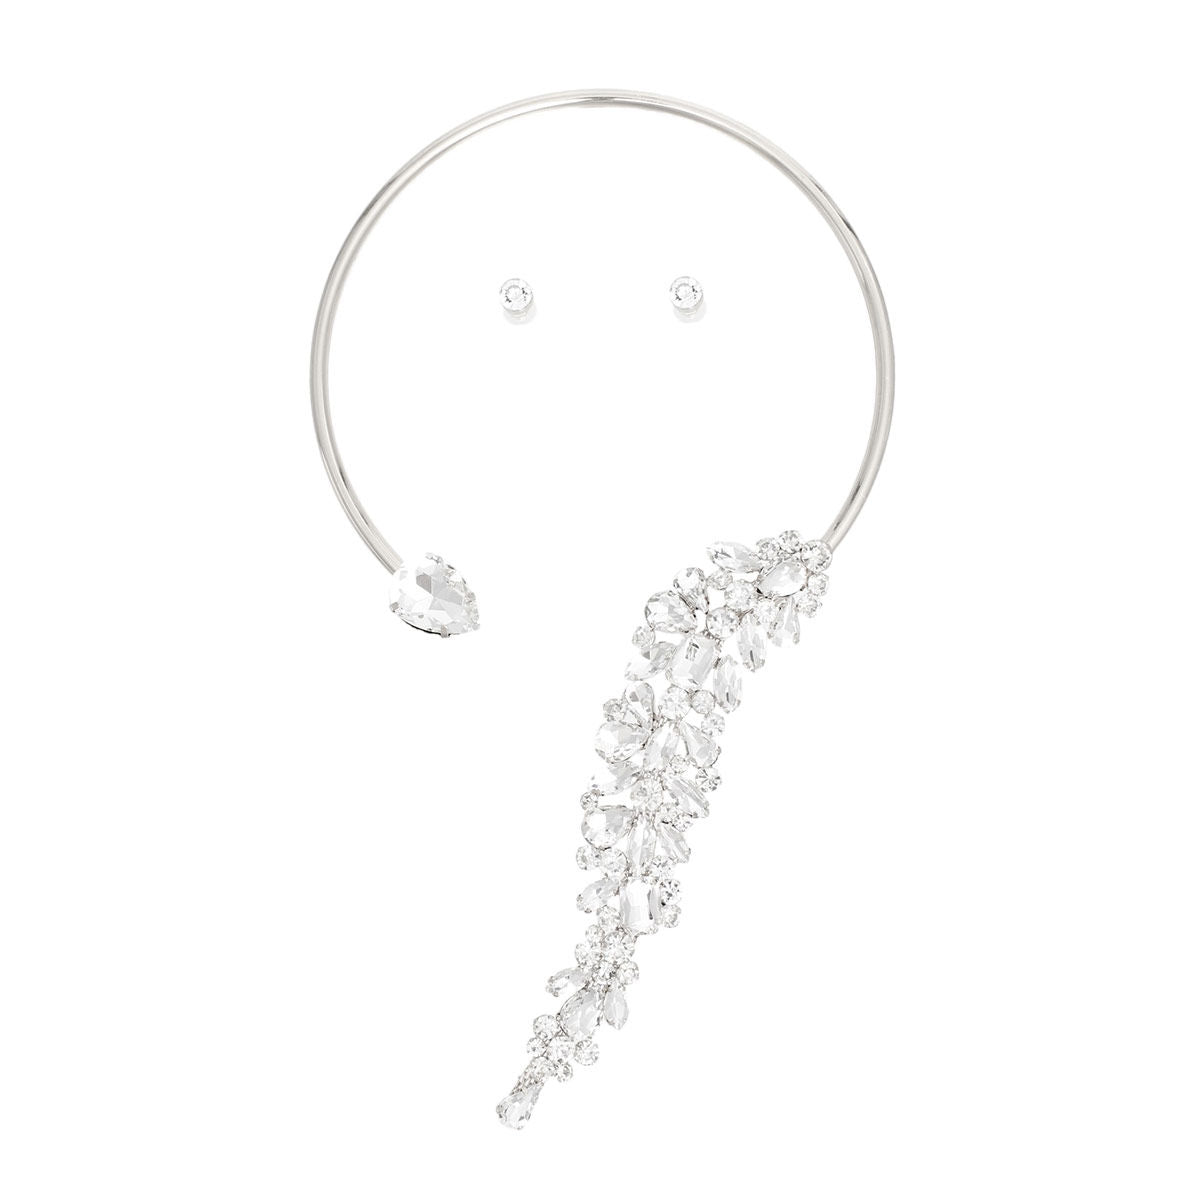 Necklace Silver Crystal Drop Choker for Women